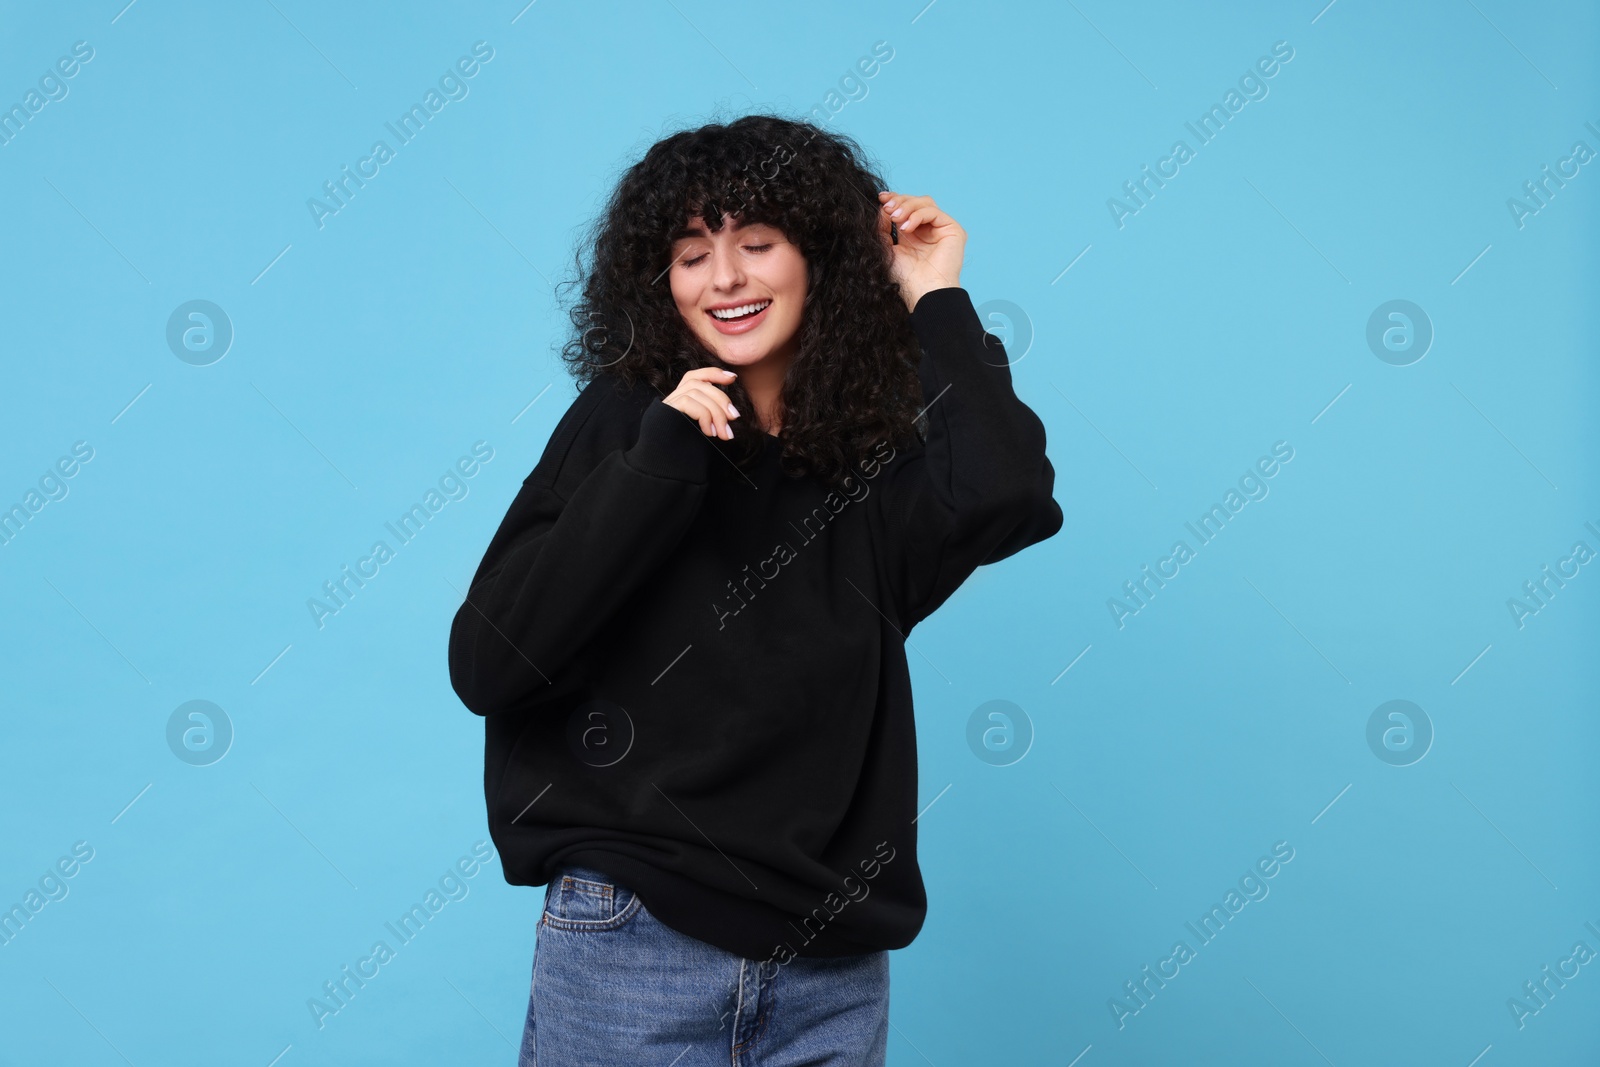 Photo of Happy young woman in stylish black sweater on light blue background